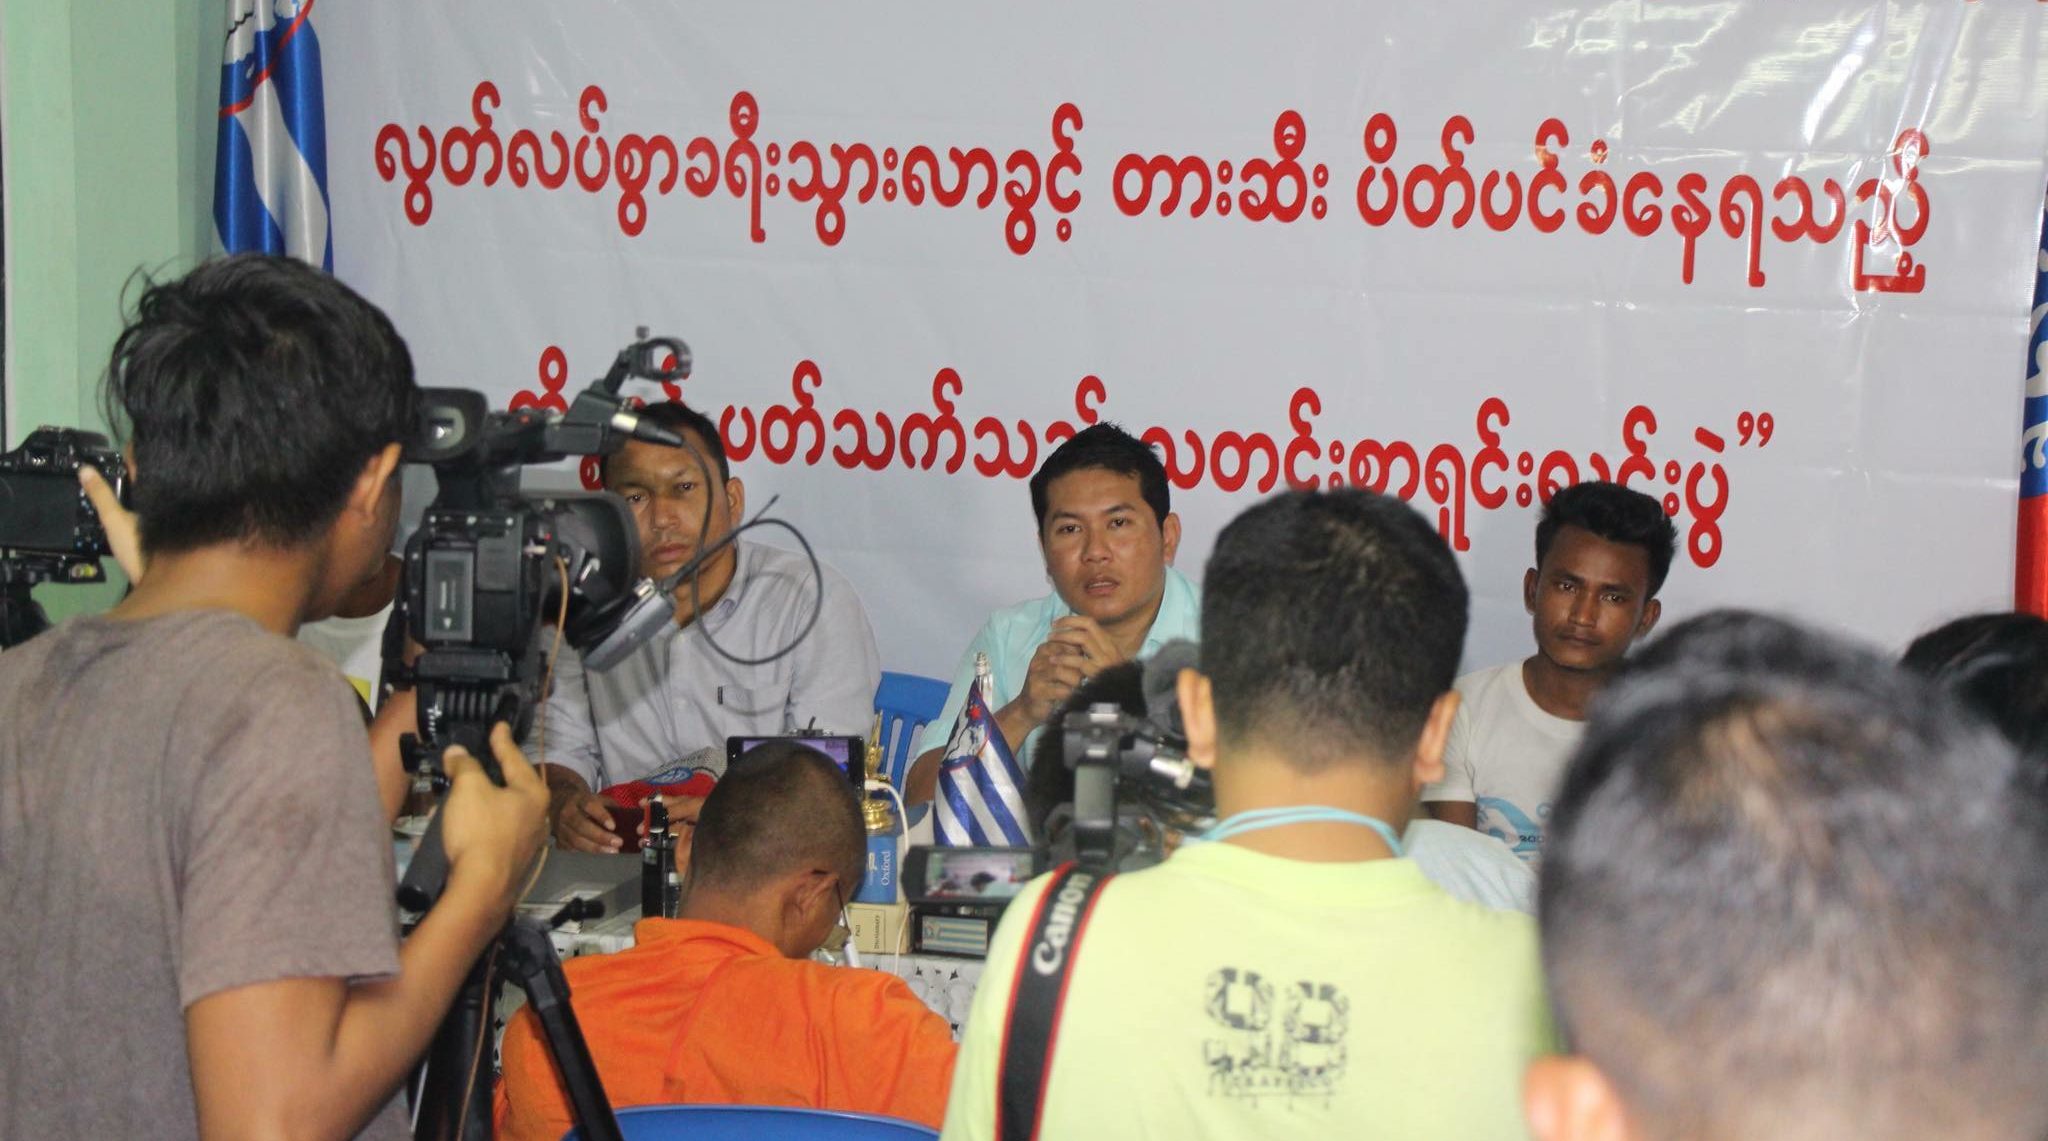 The Rakhine National Network holds a press conference with ethnic Rakhine migrant workers who were expelled from Shan State in Yangon on Aug. 30, 2018. Photo: RNN